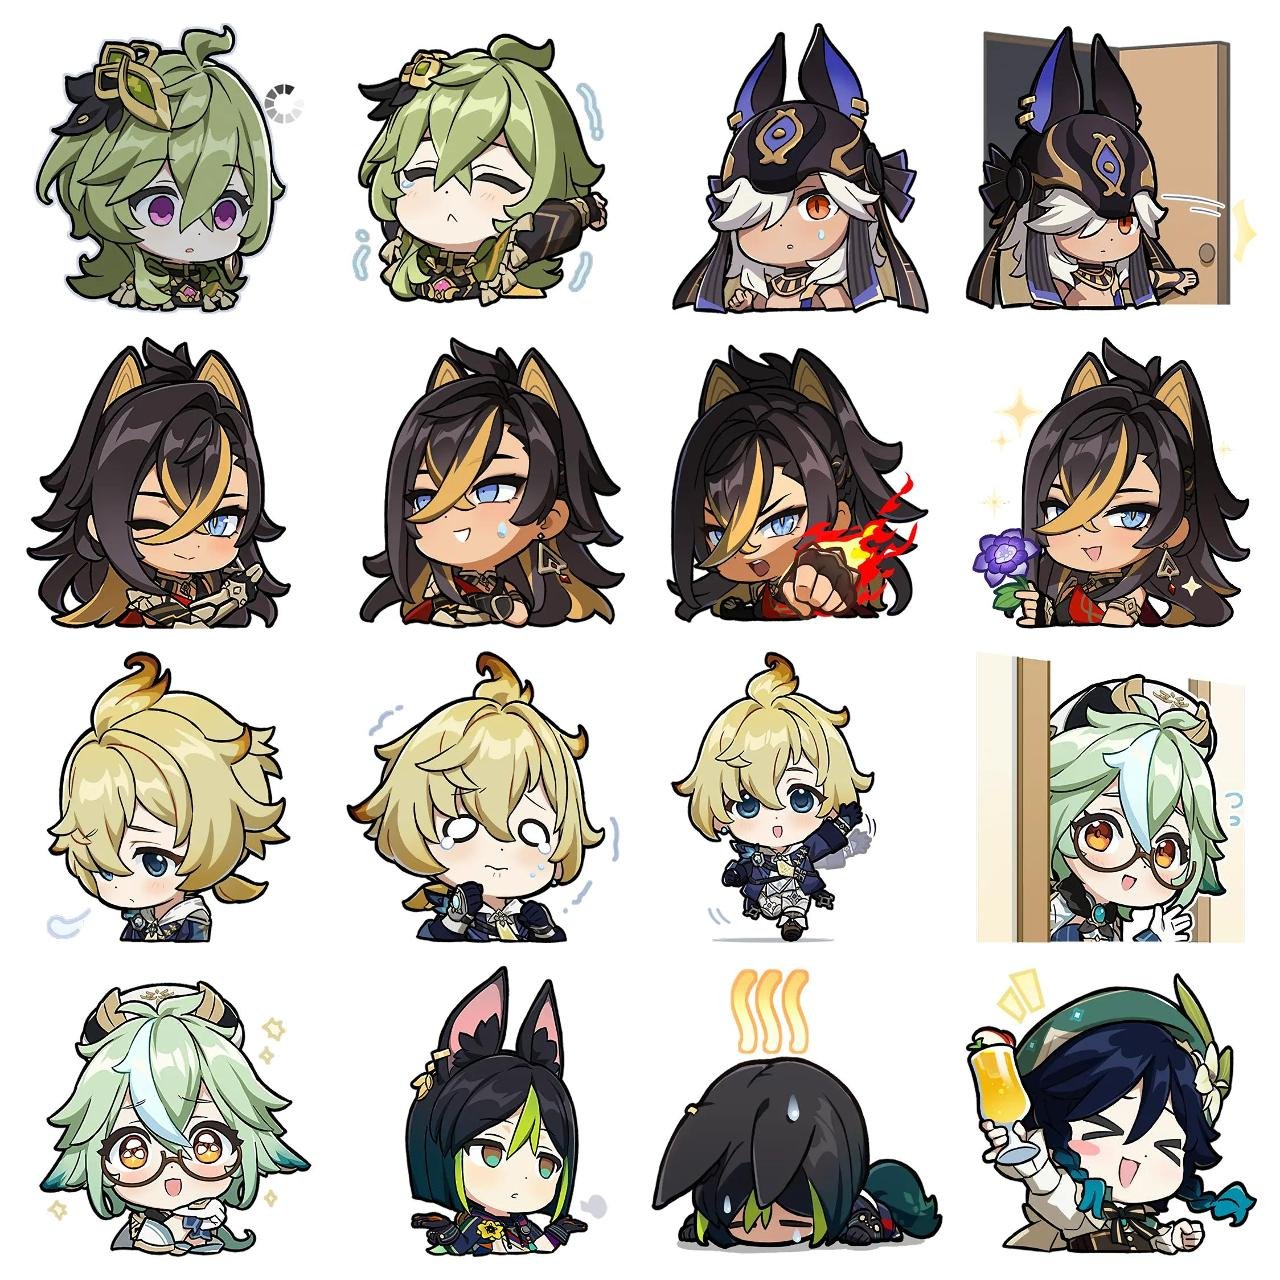 Genshin Impact #29 Anime, Genshin Impact, Game sticker pack for Whatsapp, Telegram, Signal, and others chatting and message apps